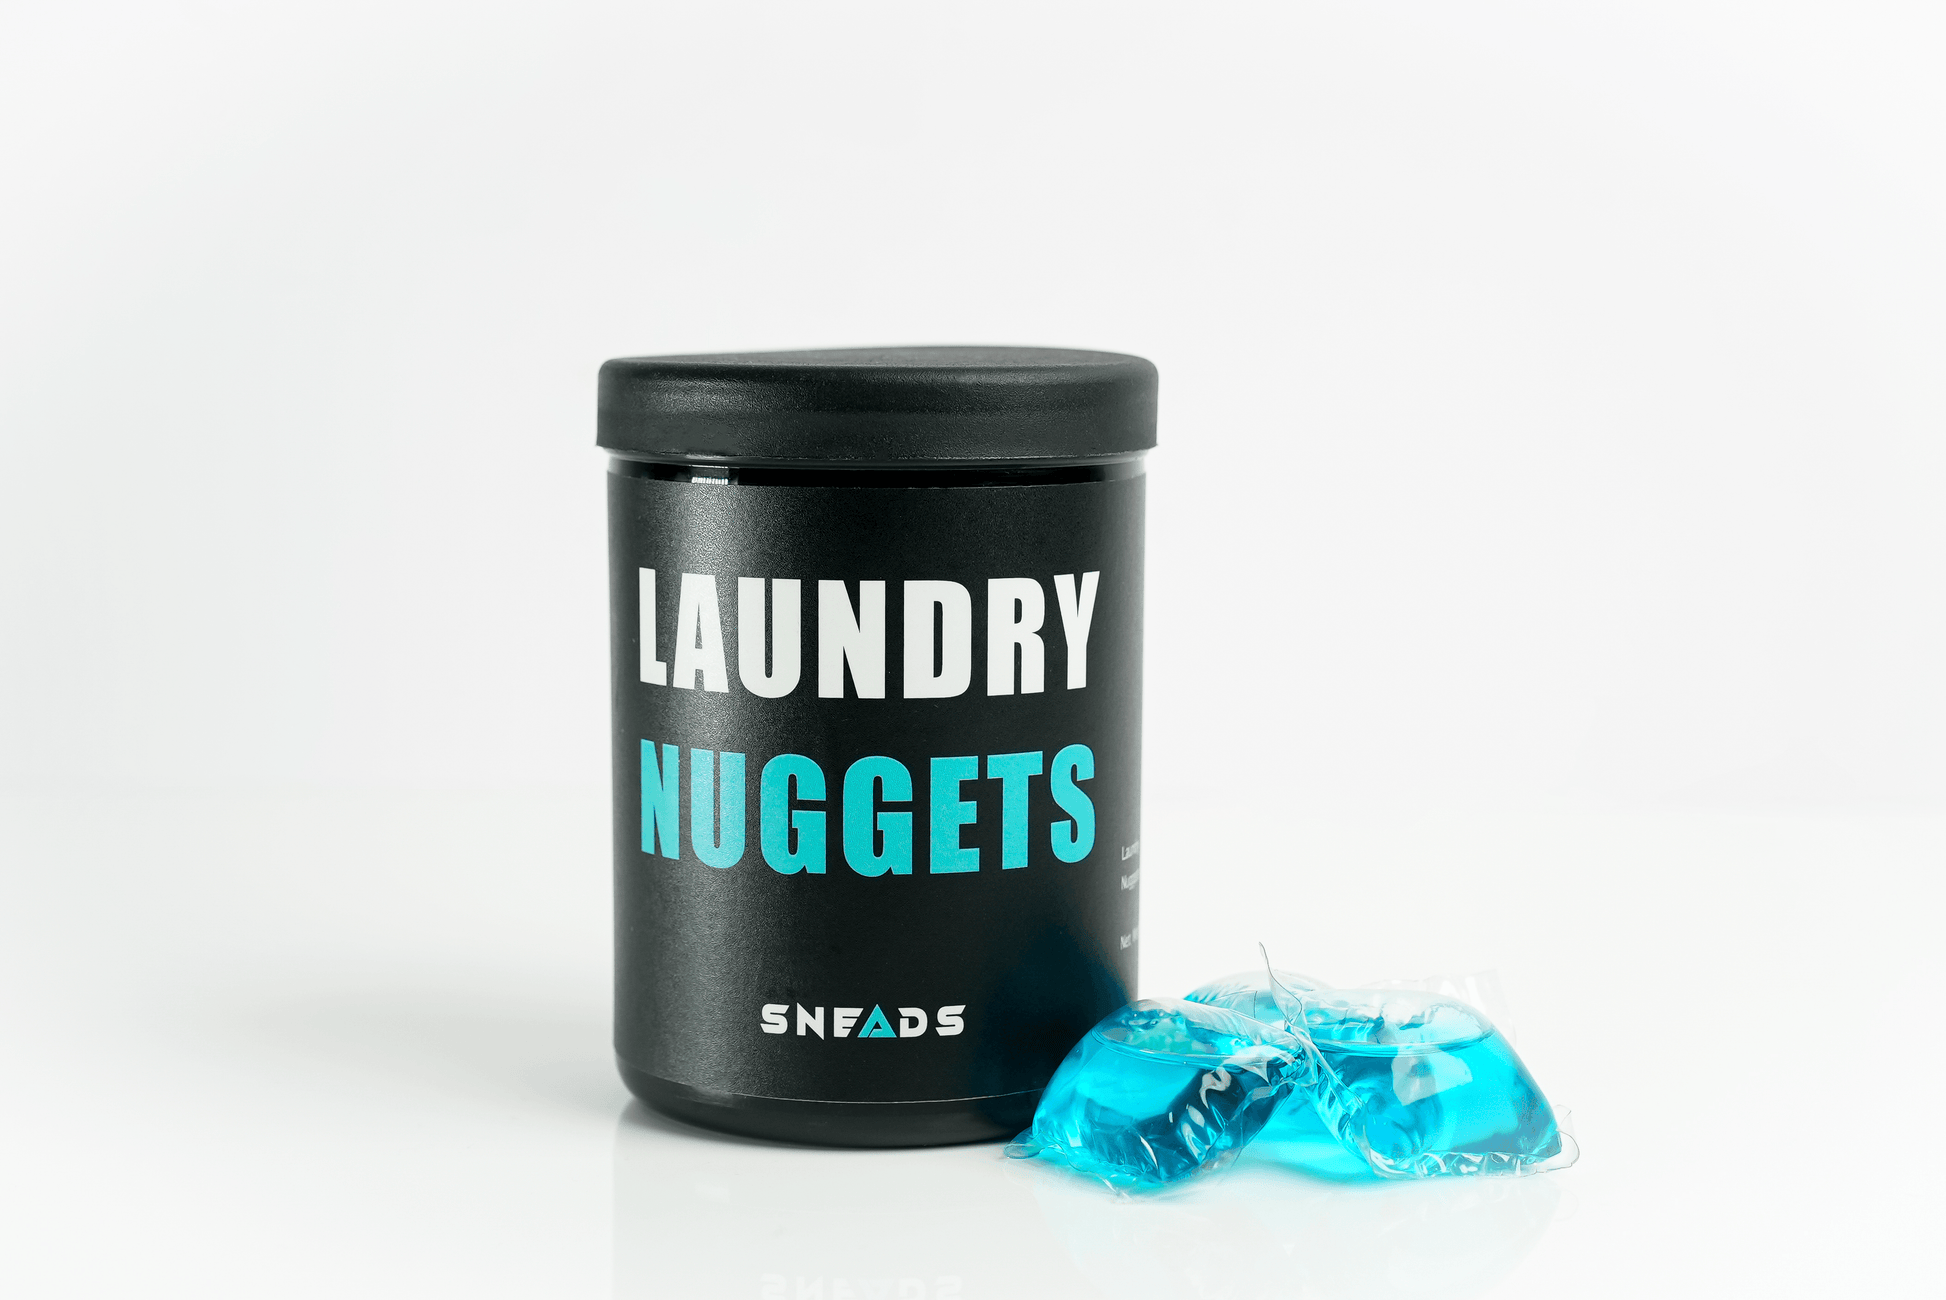 Sneaker Laundry Nuggets - Sneads